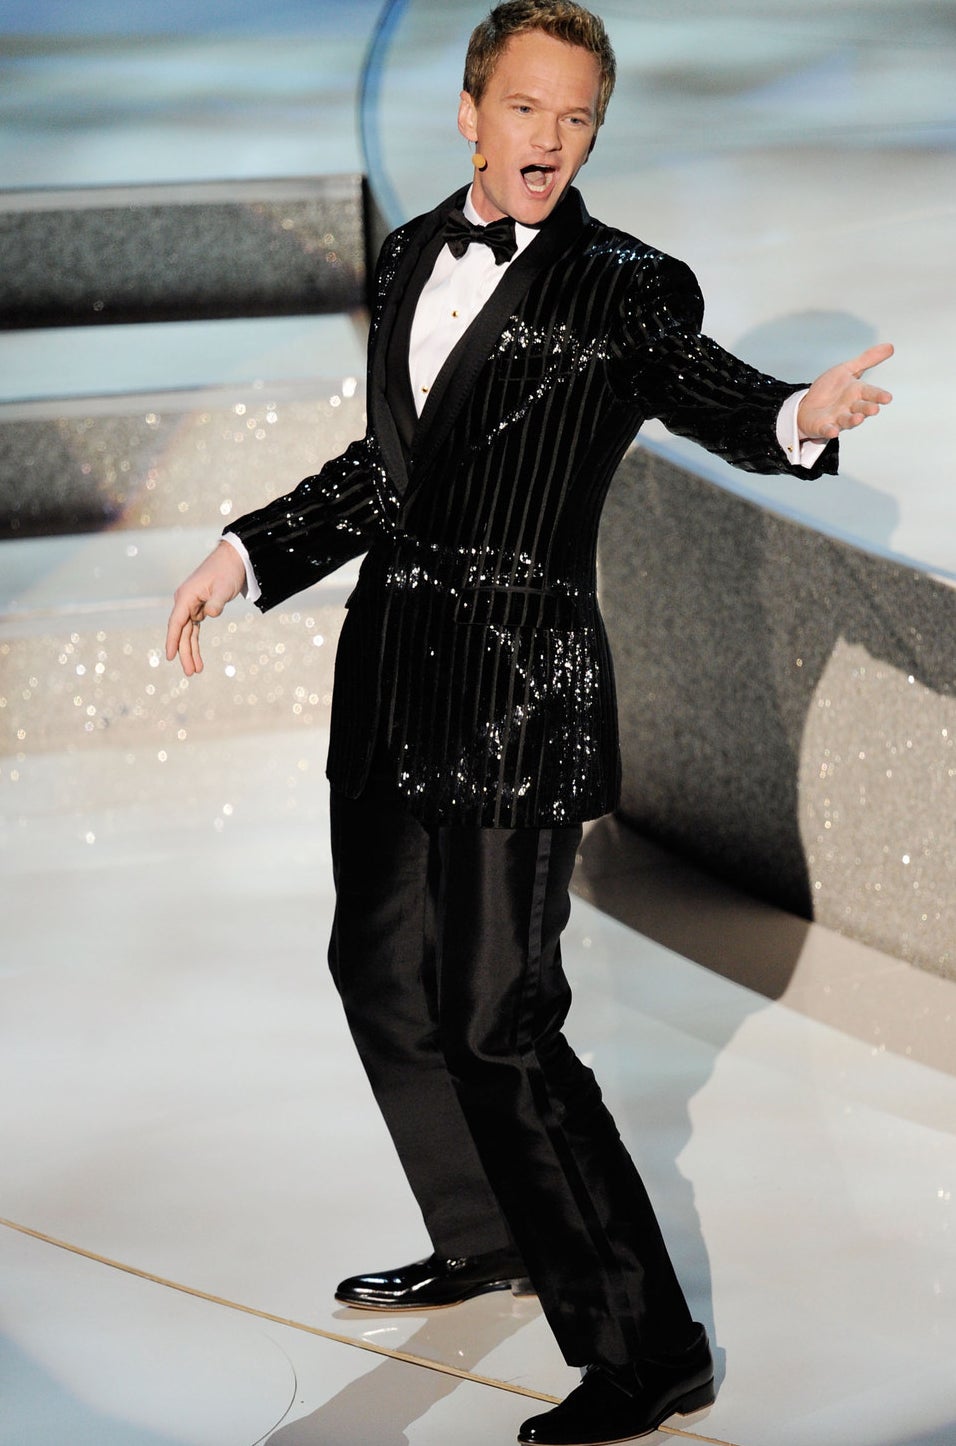 …and performing during the Academy Awards in 2010.